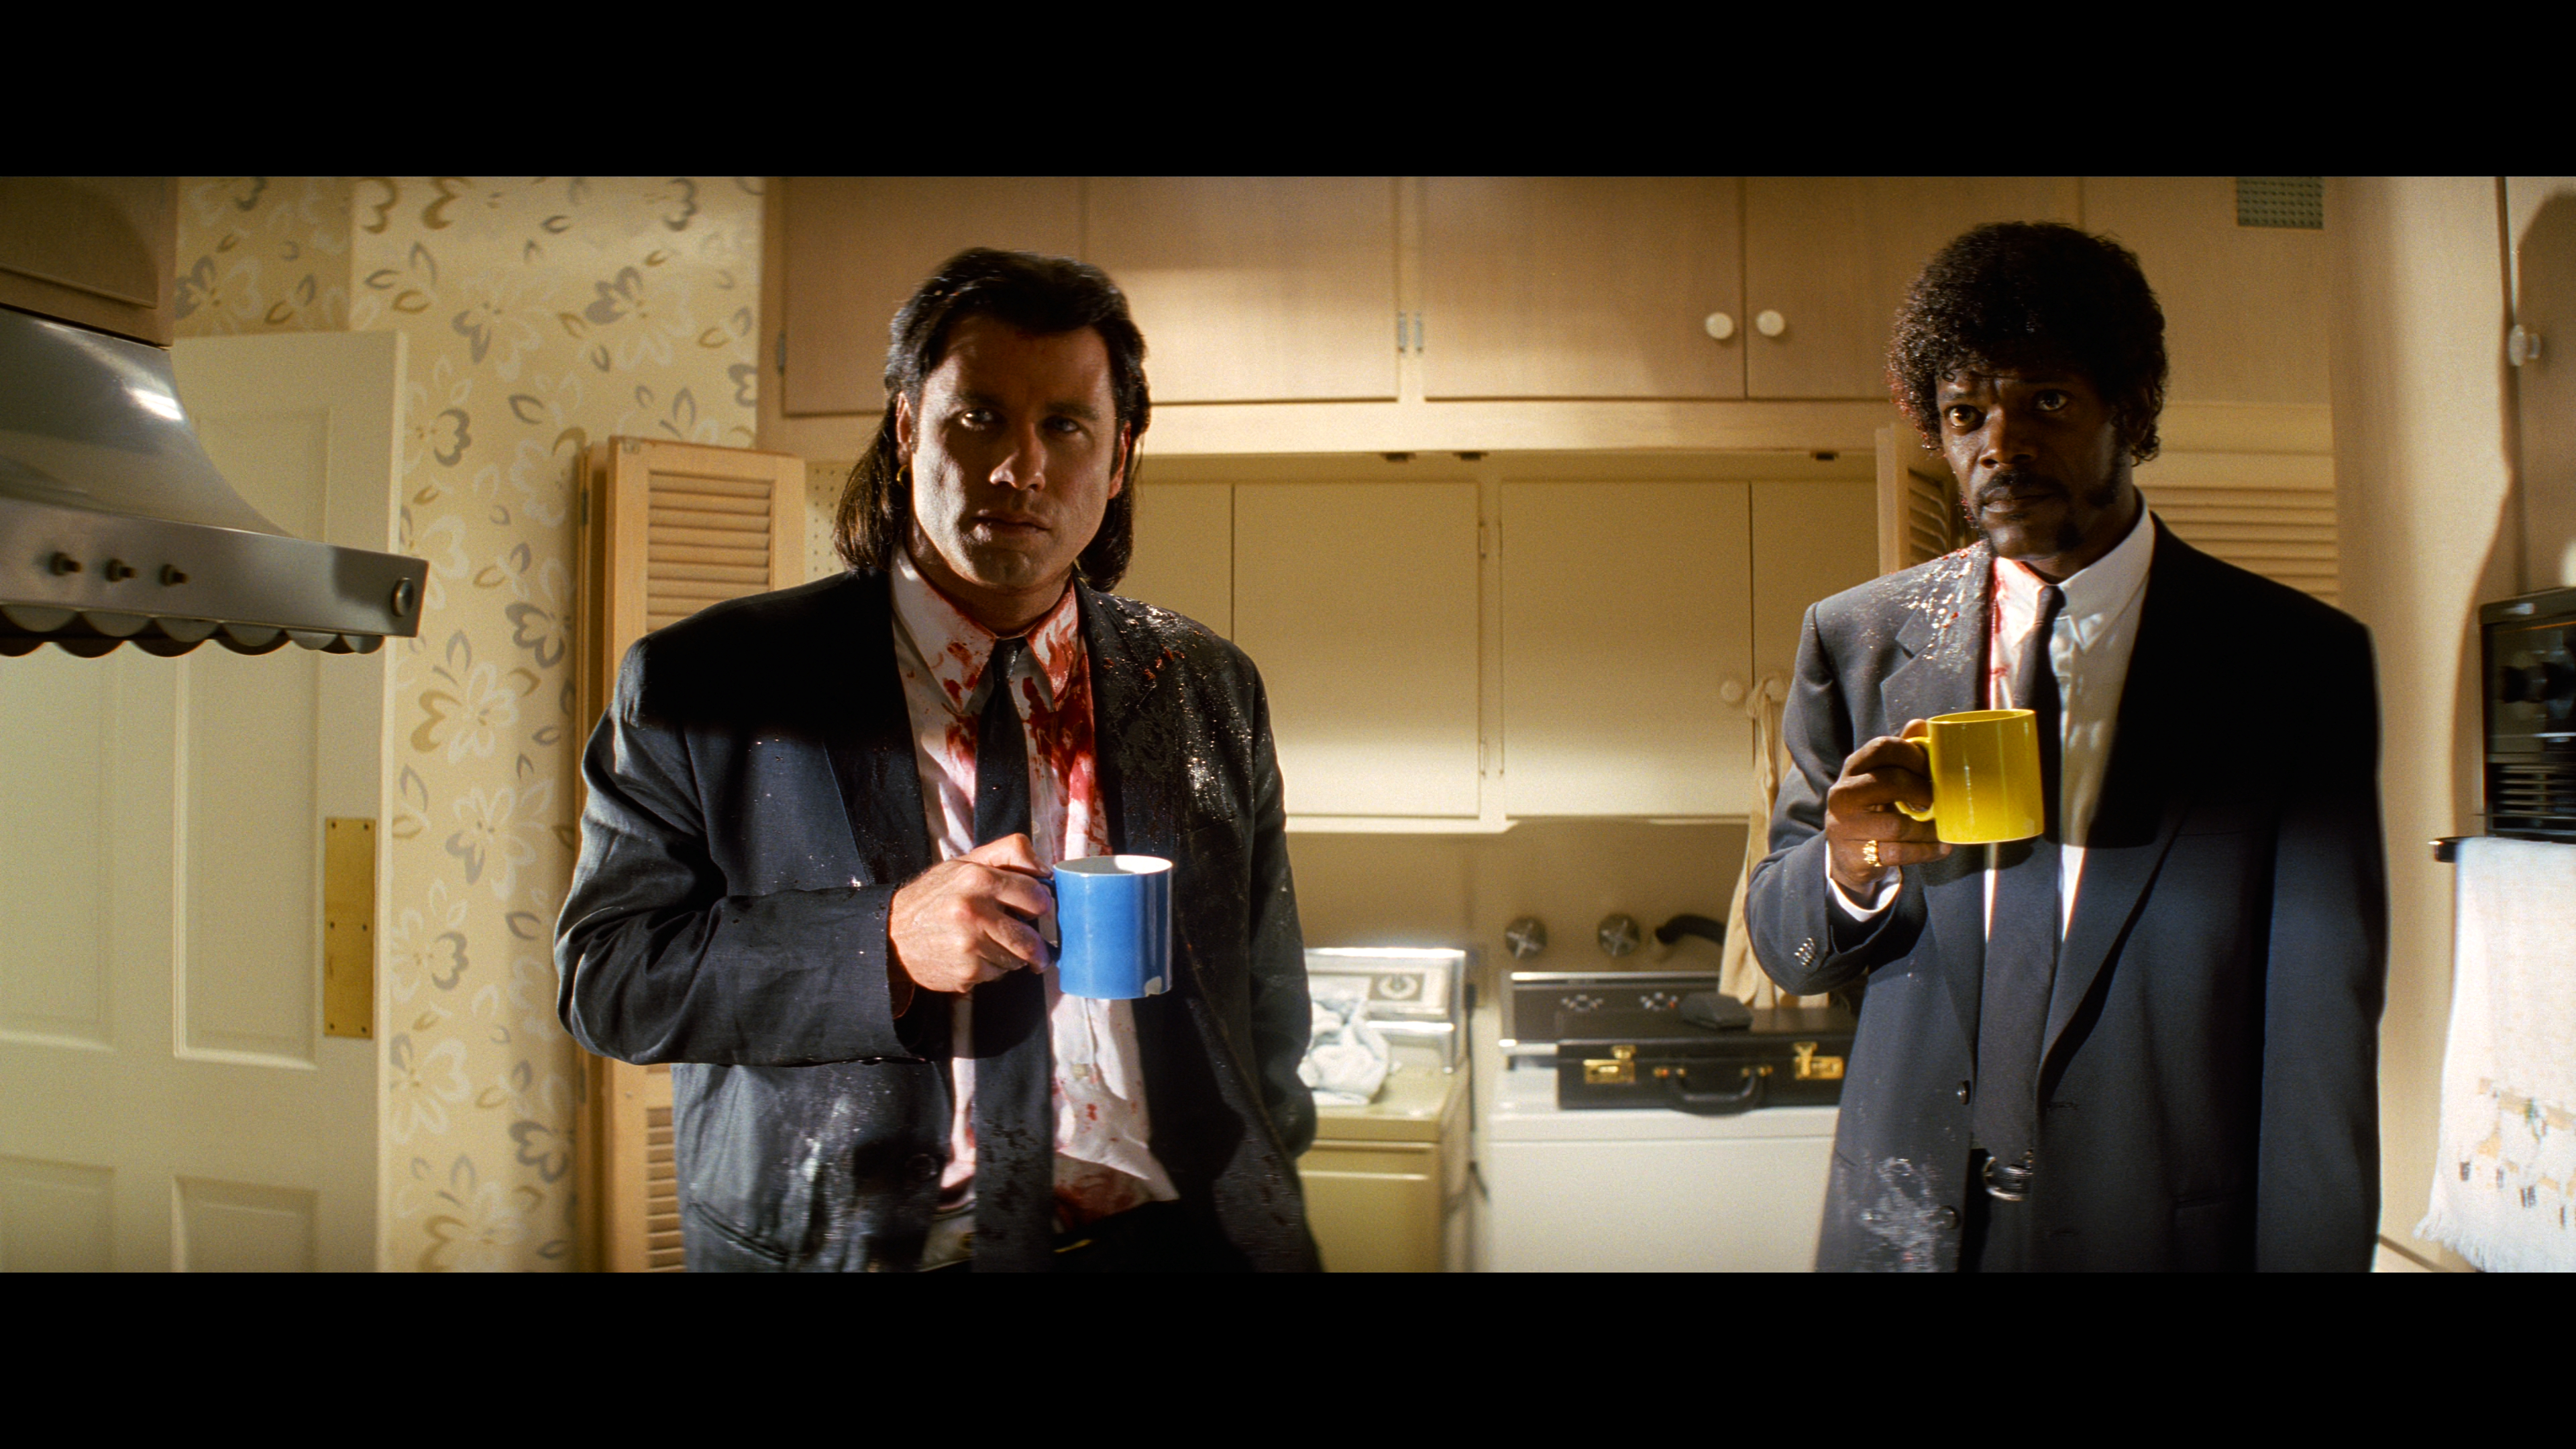 Pulp Fiction: No 8 best crime film of all time, Pulp Fiction